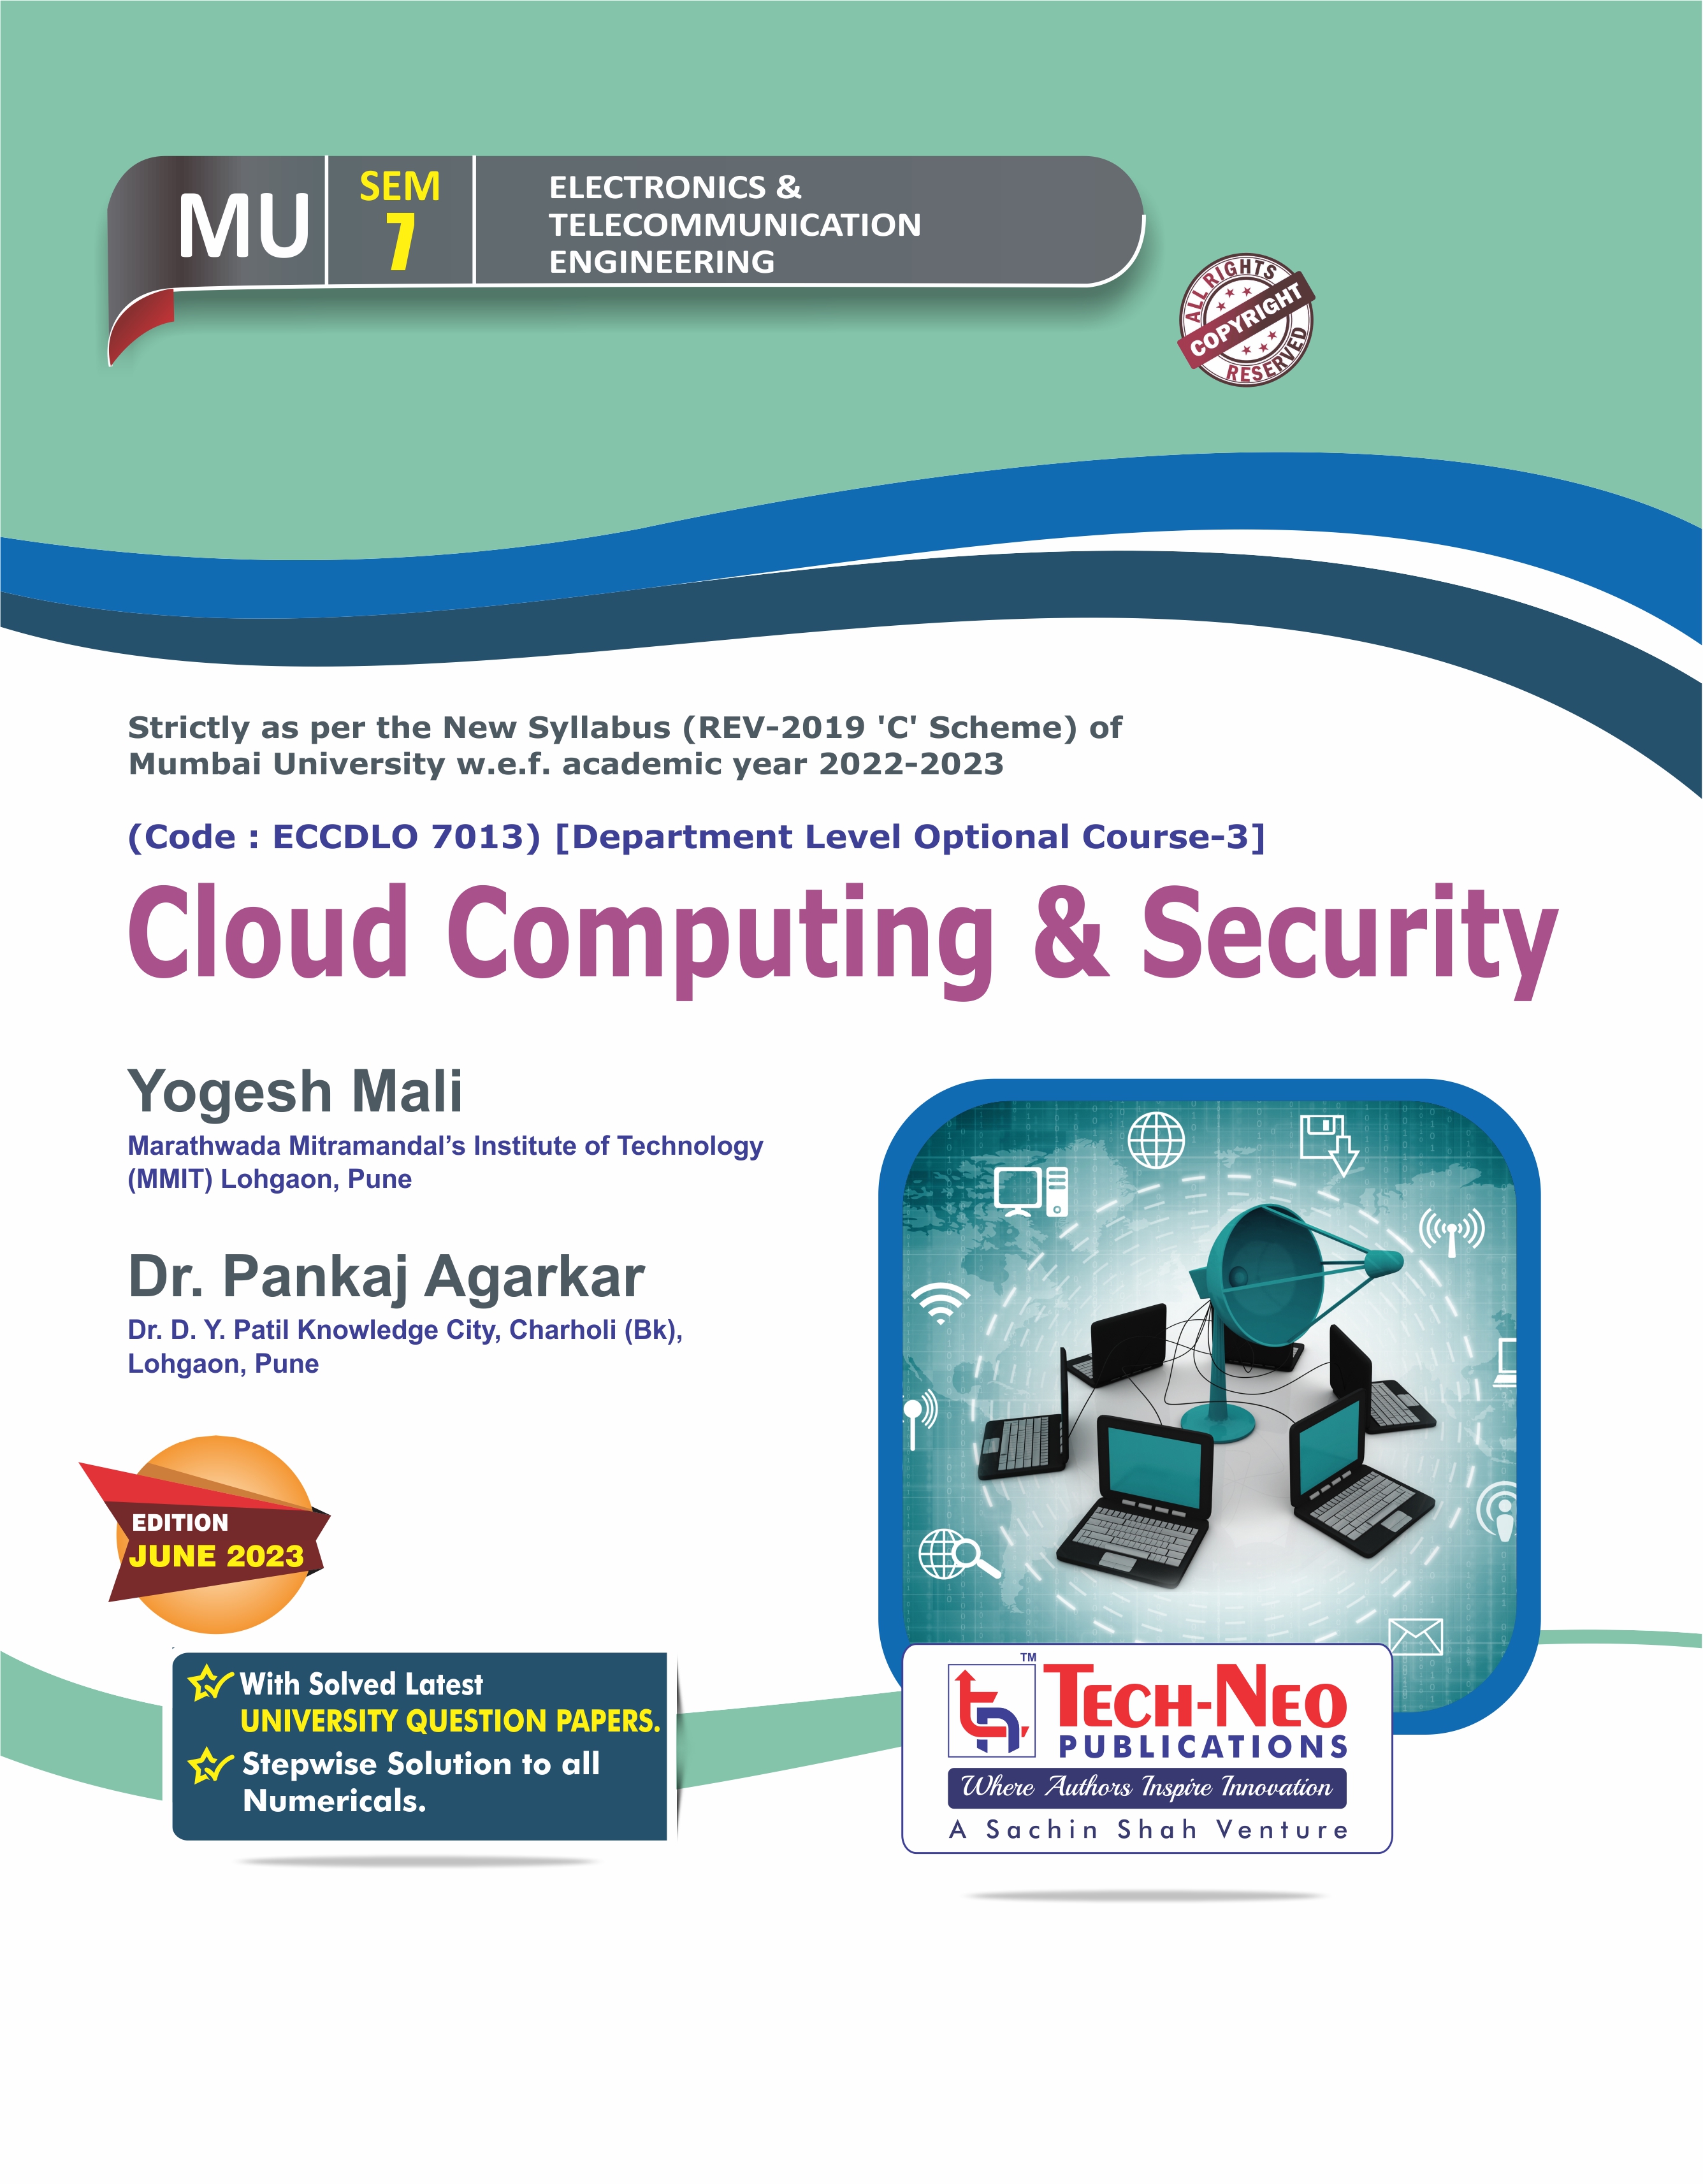 Cloud Computing and Security Sem 7 E&TC Engineering |